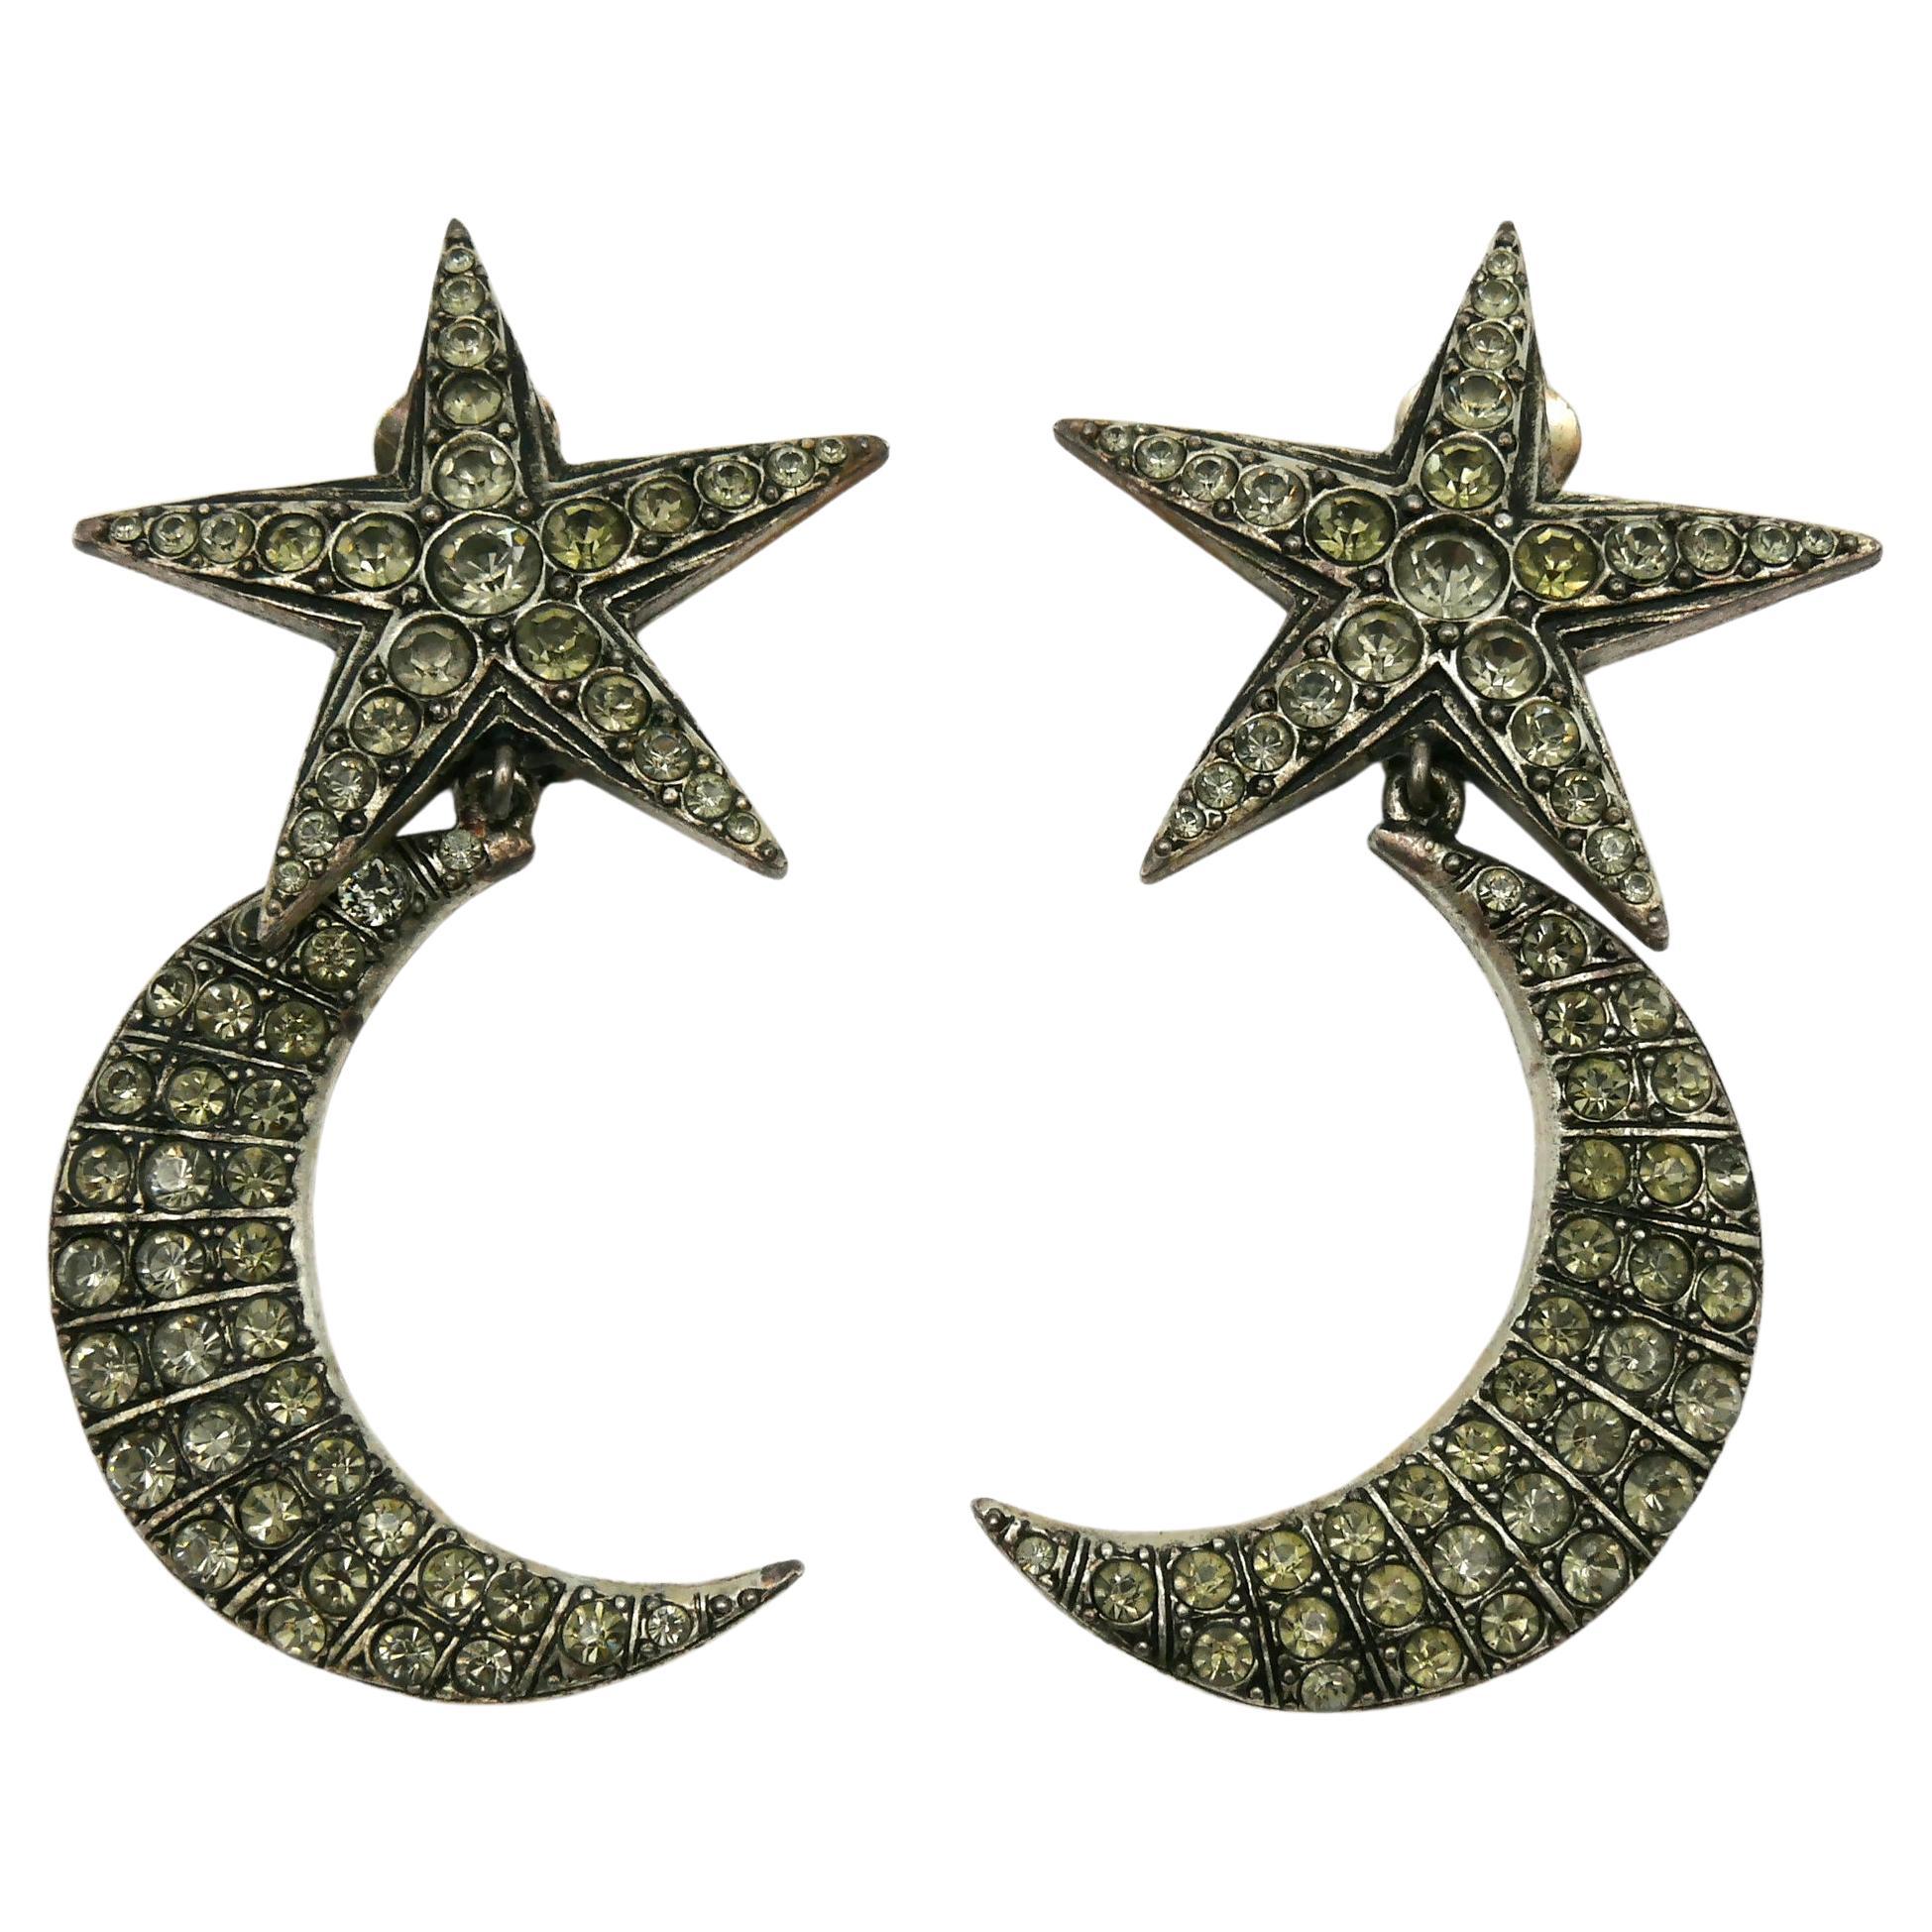 Jean Paul Gaultier Vintage Jewelled Star and Crescent Moon Dangling Earrings